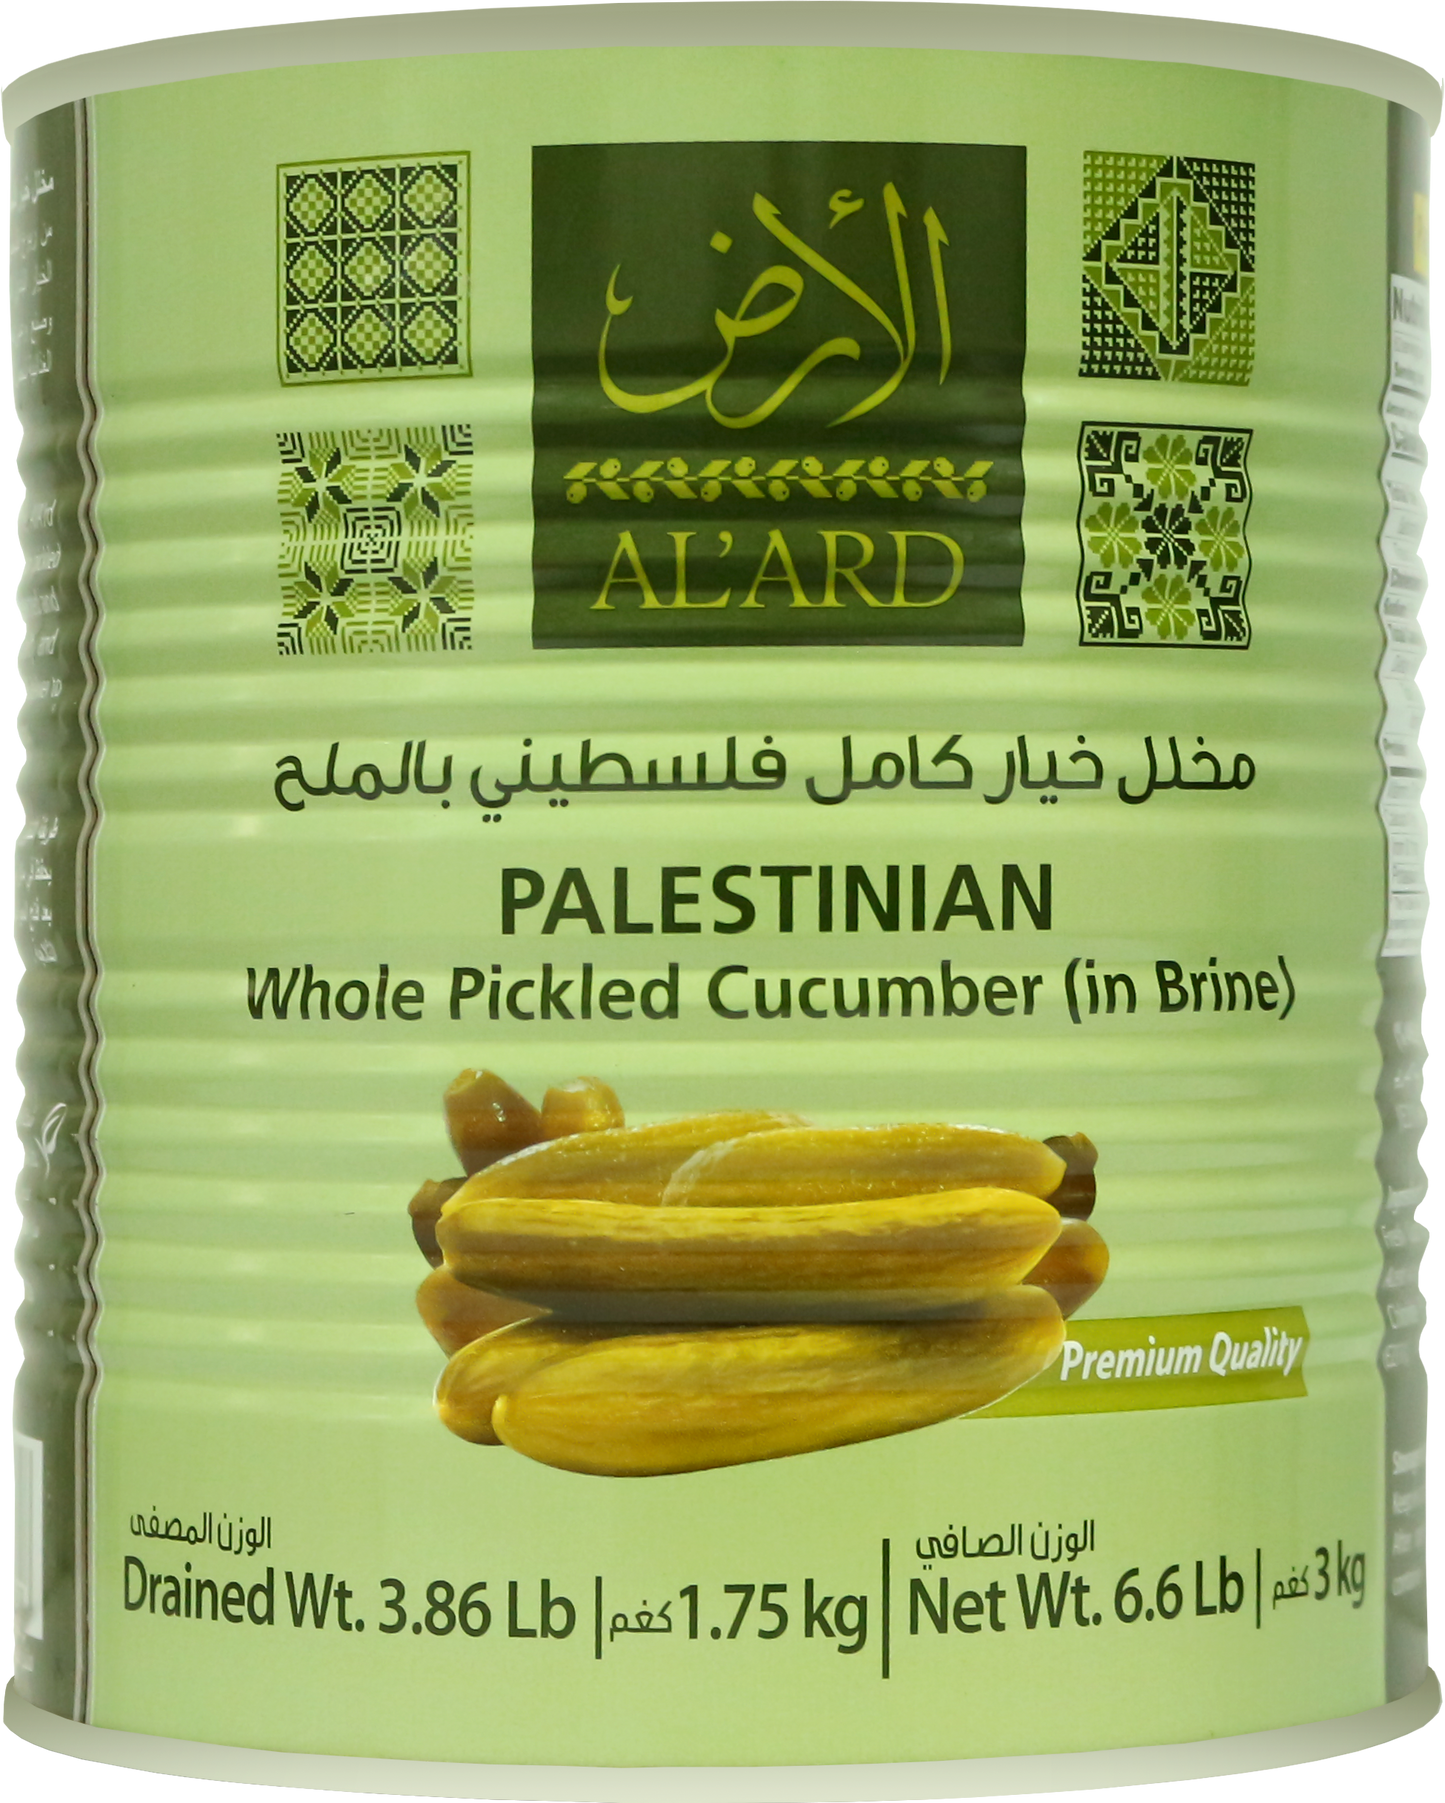 3K / pickled whole Palestinian cucumber with 60-80 salt